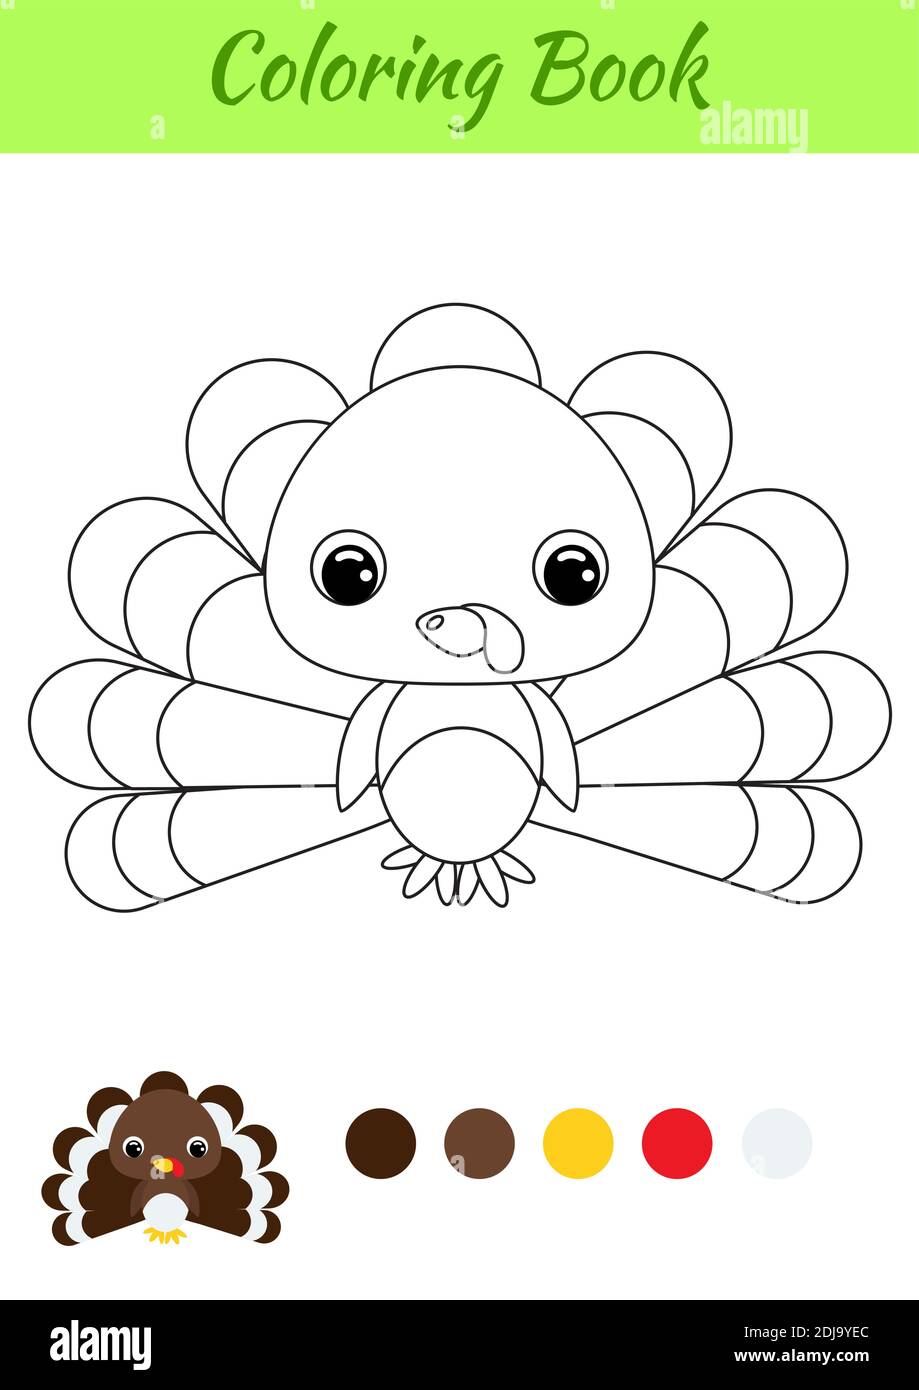 Coloring book little baby turkey coloring page for kids educational activity for preschool years kids and toddlers with cute animal stock vector image art